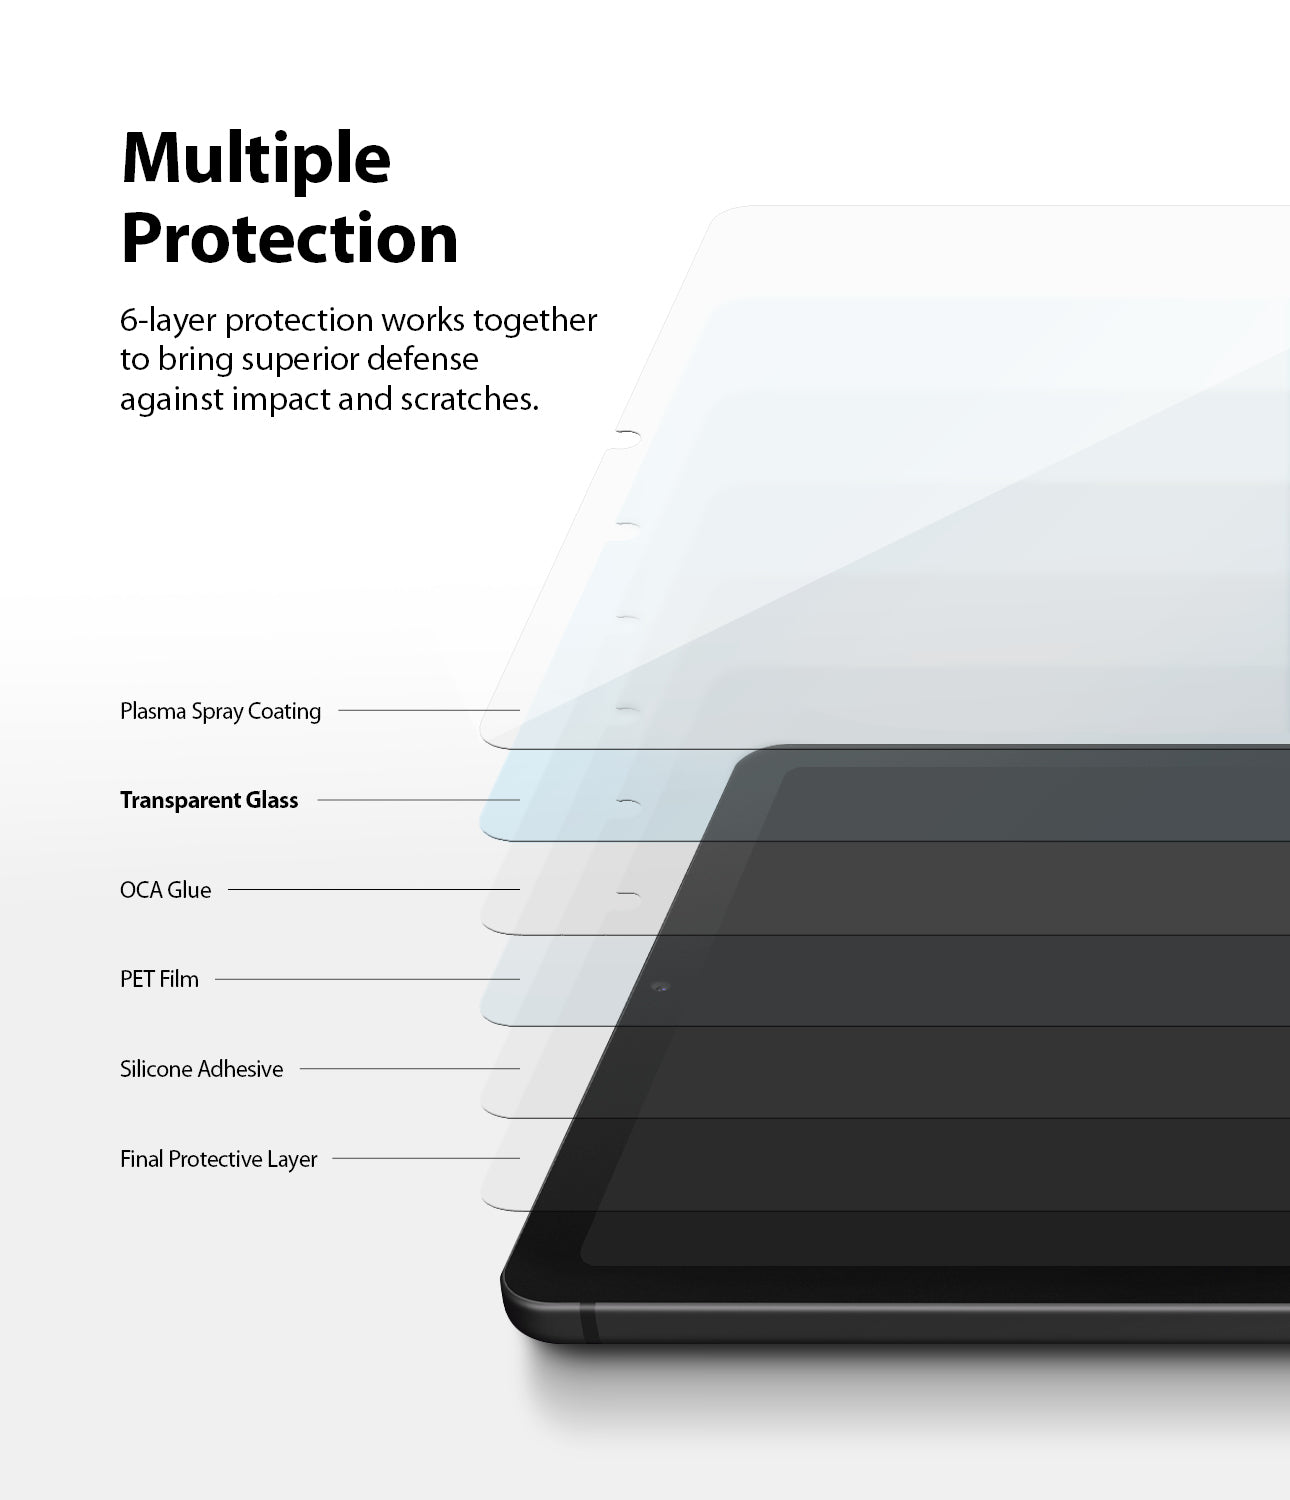 multiple protection - 6 layer protection works together to bring superior defense against impact and scratches